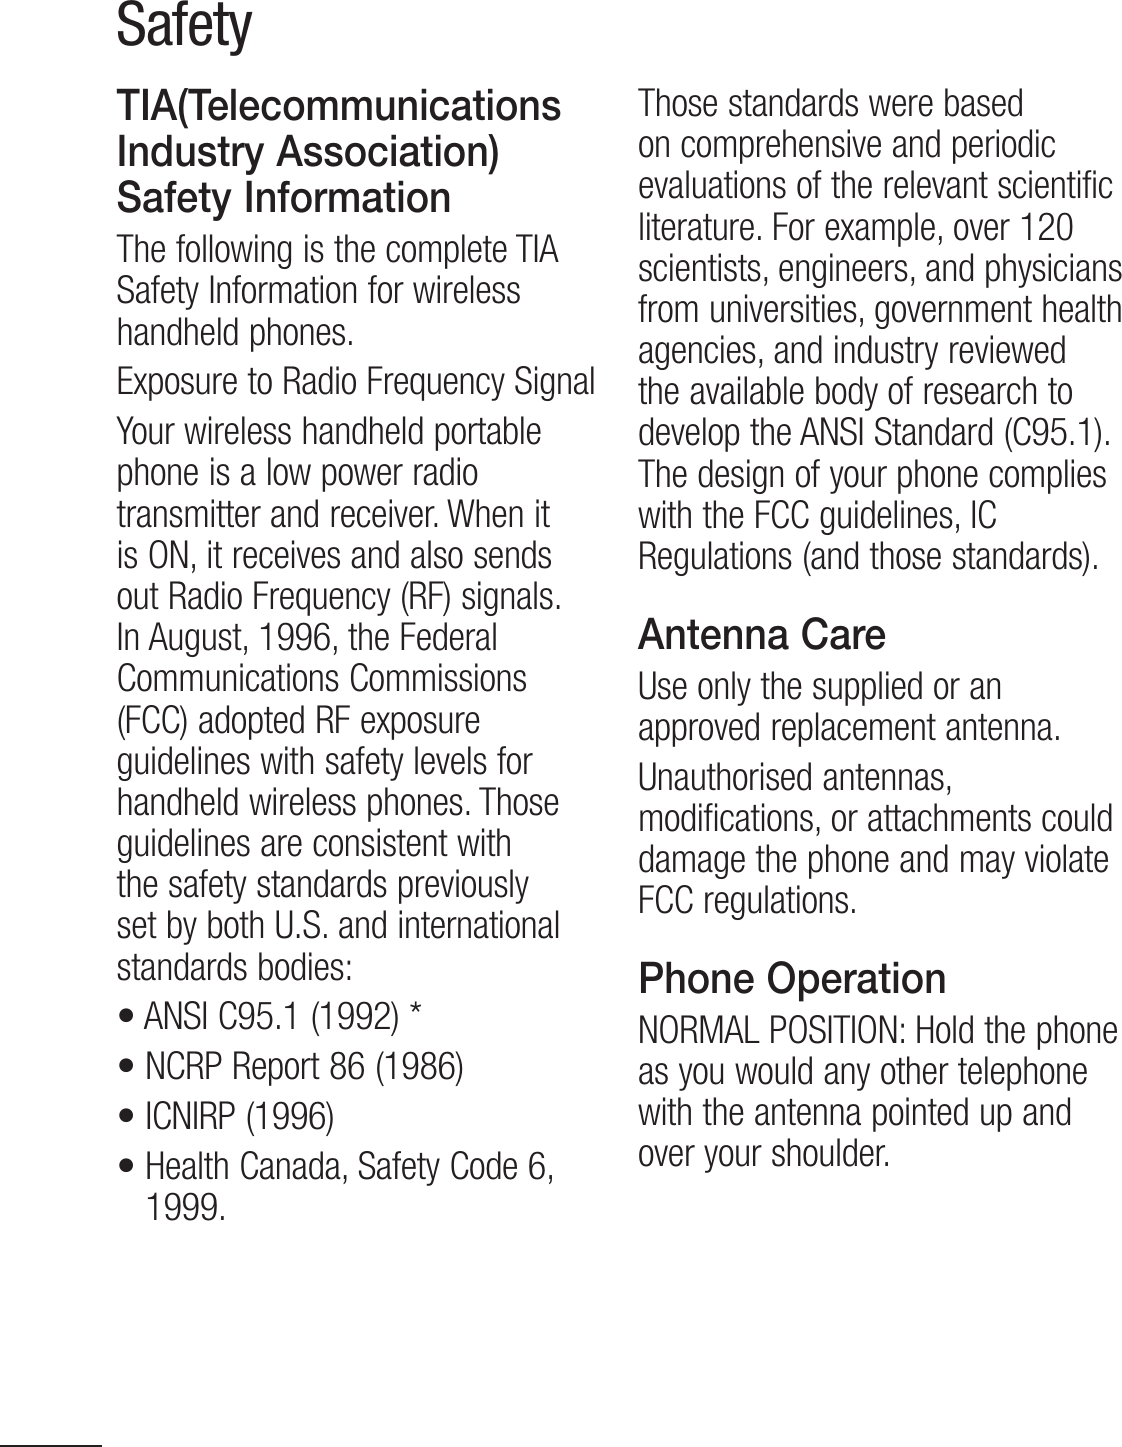 4SafetyTIA(Telecommunications Industry Association) Safety InformationThe following is the complete TIA Safety Information for wireless handheld phones.Exposure to Radio Frequency SignalYour wireless handheld portable phone is a low power radio transmitter and receiver. When it is ON, it receives and also sends out Radio Frequency (RF) signals. In August, 1996, the Federal Communications Commissions (FCC) adopted RF exposure guidelines with safety levels for handheld wireless phones. Those guidelines are consistent with the safety standards previously set by both U.S. and international standards bodies:t&quot;/4*$t/$313FQPSUt*$/*31t)FBMUI$BOBEB4BGFUZ$PEF1999.Those standards were based on comprehensive and periodic evaluations of the relevant scientific literature. For example, over 120 scientists, engineers, and physicians from universities, government health agencies, and industry reviewed the available body of research to develop the ANSI Standard (C95.1). The design of your phone complies with the FCC guidelines, IC Regulations (and those standards).Antenna CareUse only the supplied or an approved replacement antenna.Unauthorised antennas, modifications, or attachments could damage the phone and may violate FCC regulations.Phone Operation/03.&quot;-104*5*0/)PMEUIFQIPOFas you would any other telephone with the antenna pointed up and over your shoulder.